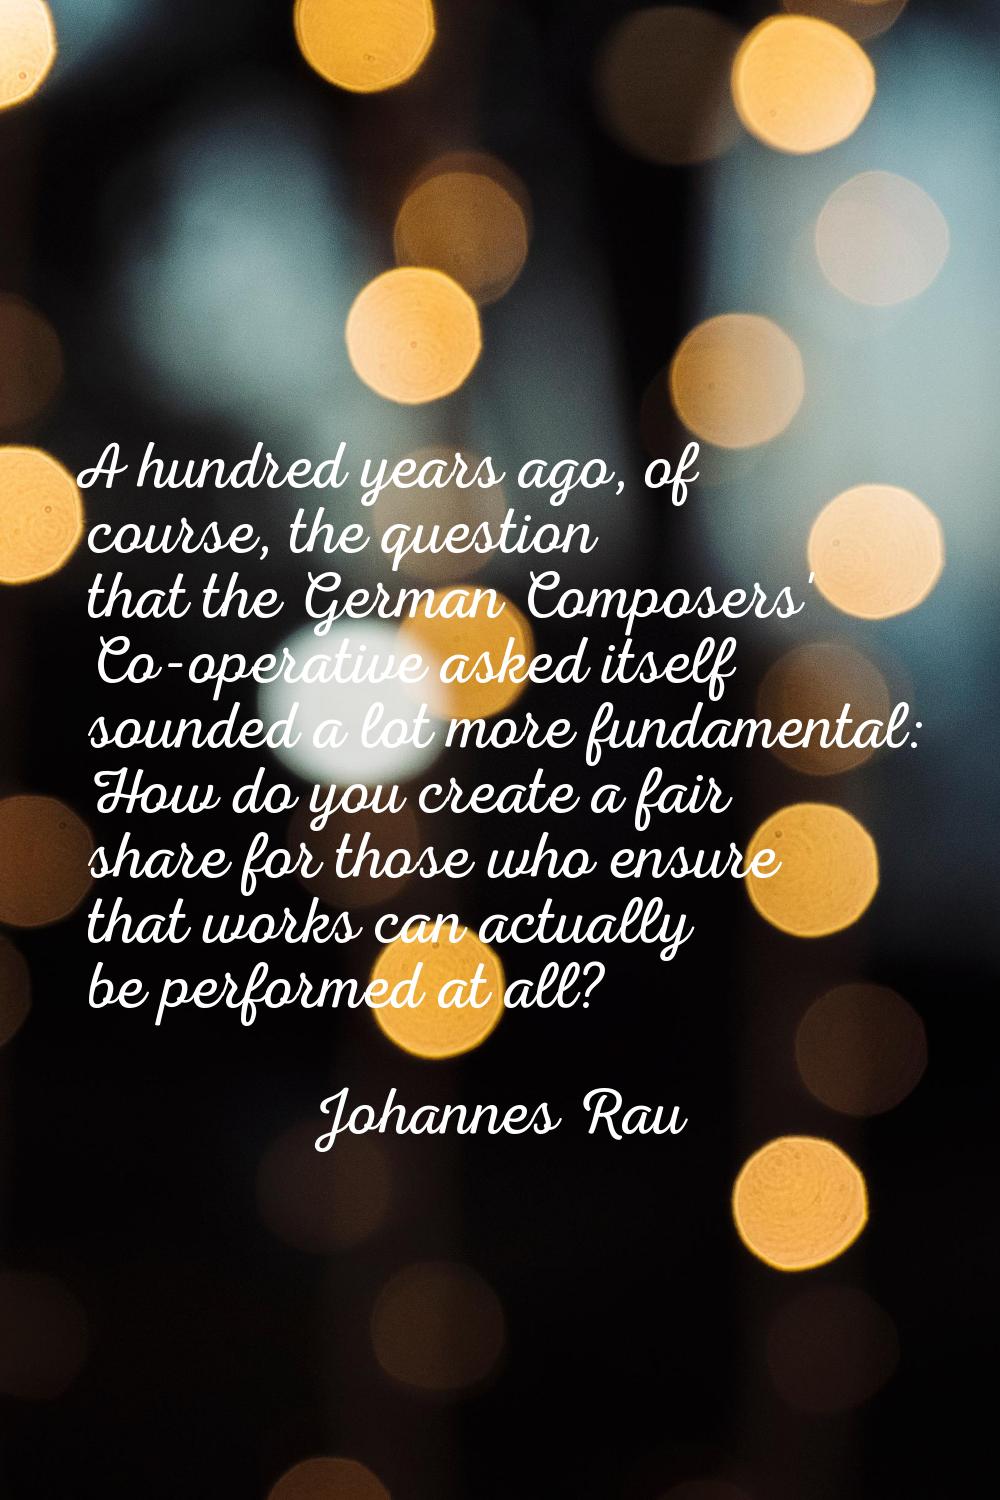 A hundred years ago, of course, the question that the German Composers' Co-operative asked itself s